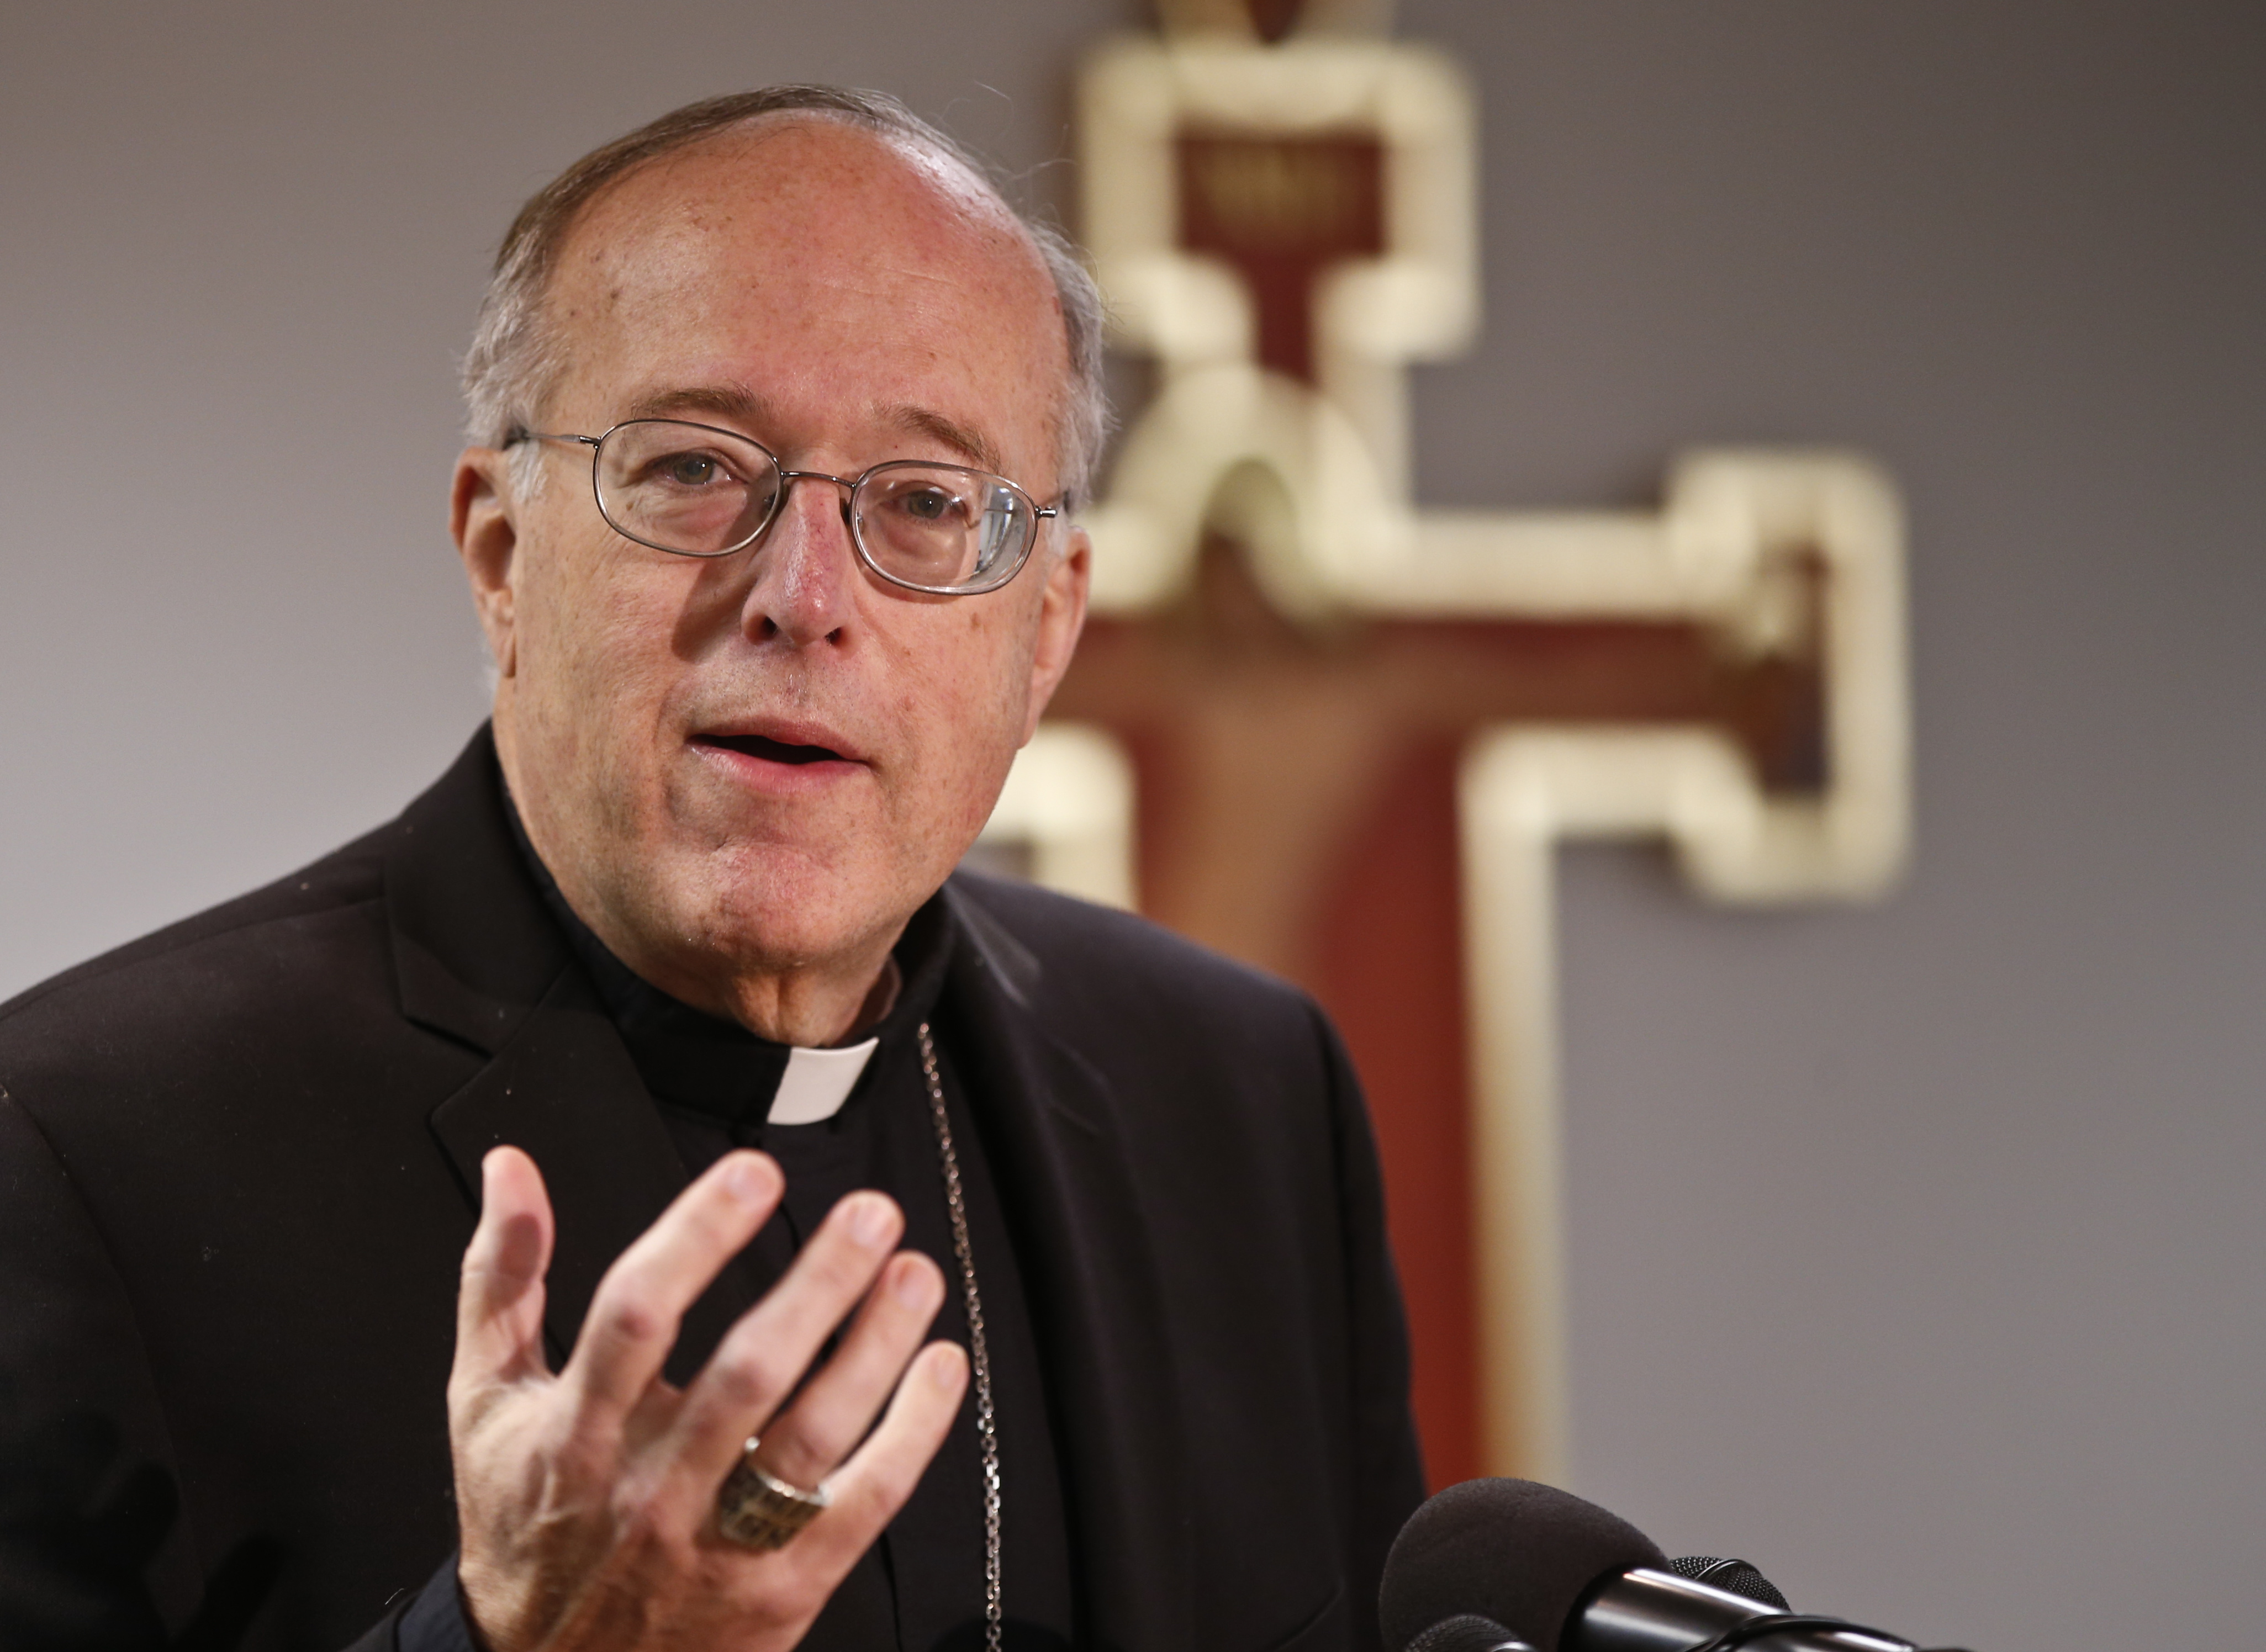 Bishop Robert McElroy speaks during a news conference in San Diego in March 2015. (AP Photo/Lenny Ignelzi)